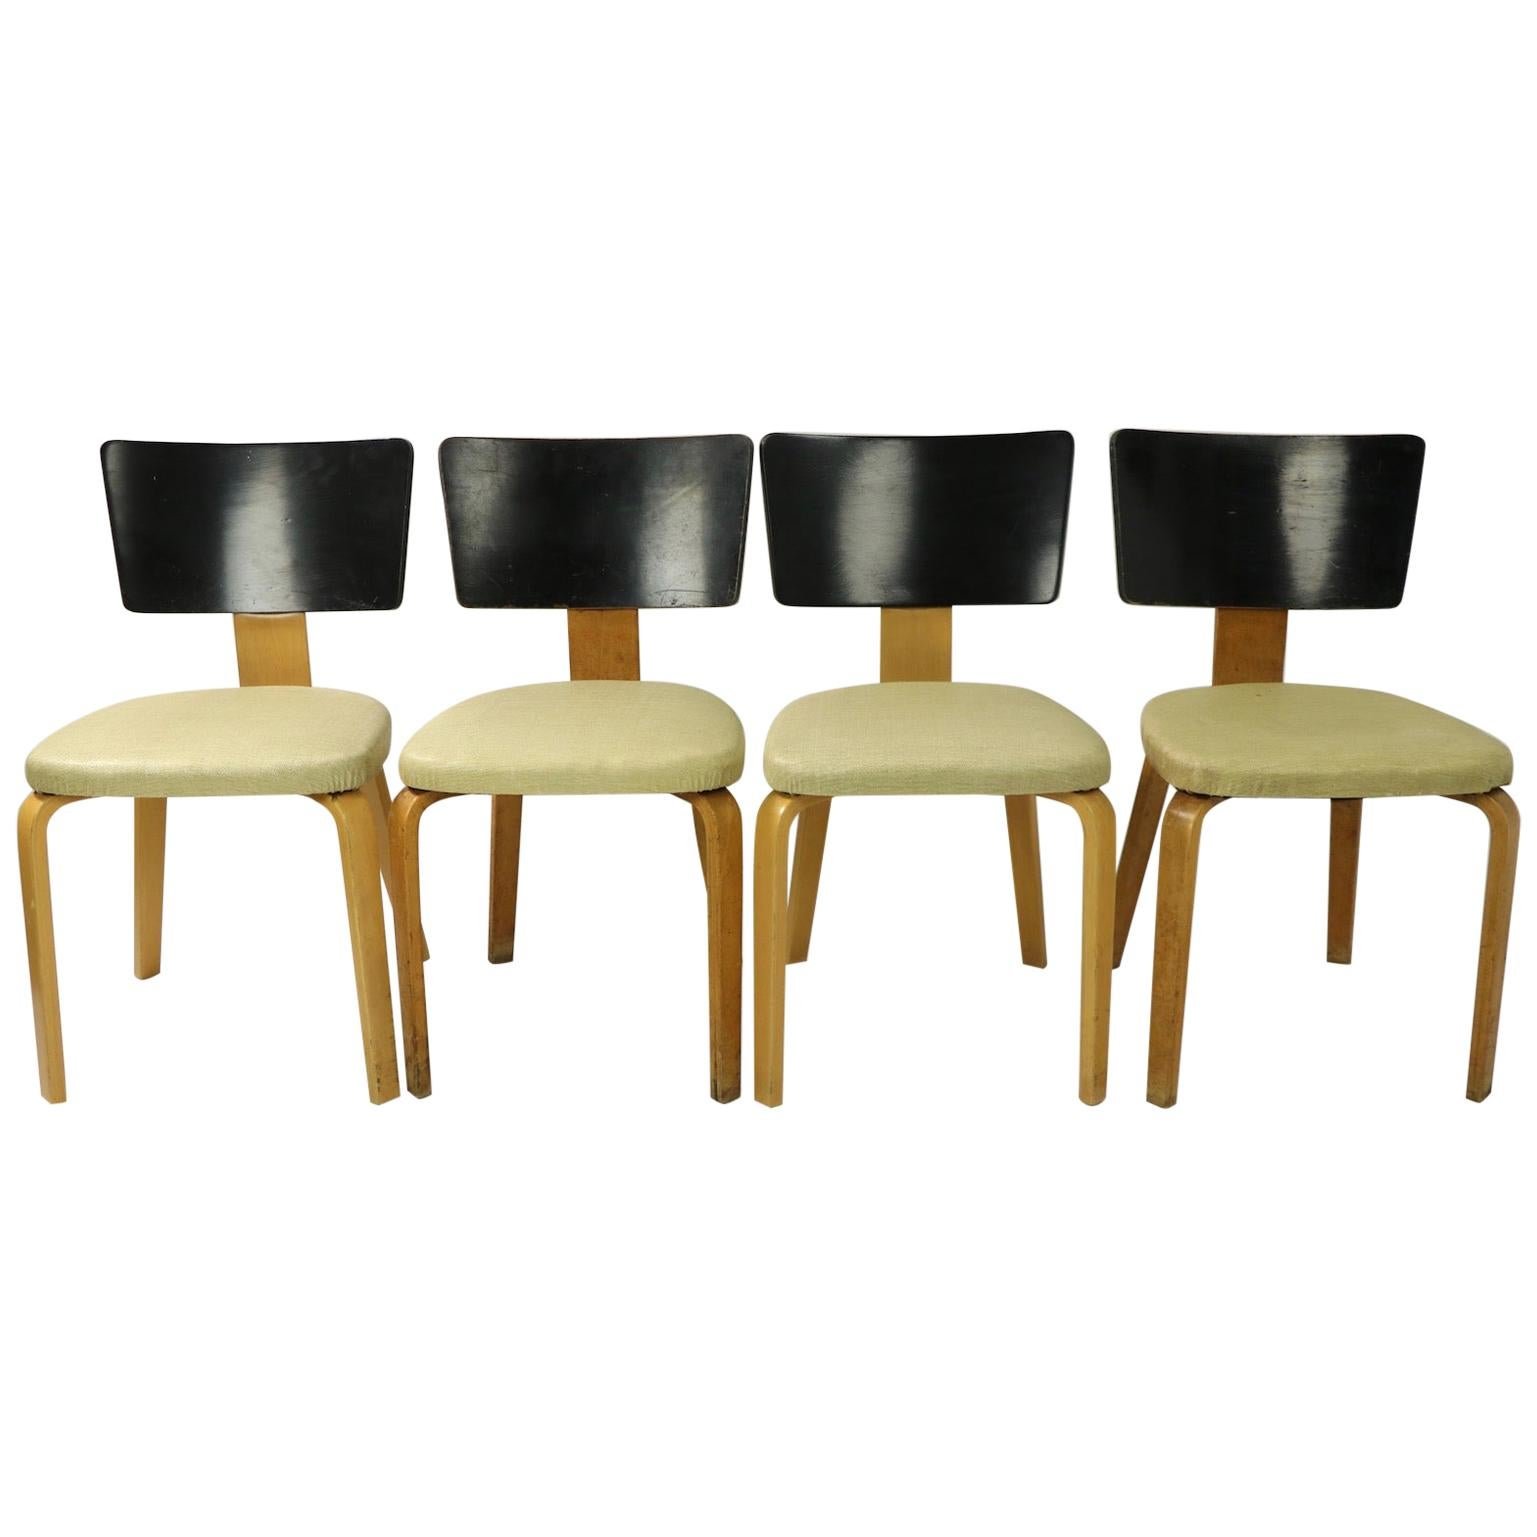 Set of 4 Thonet Dining Chairs